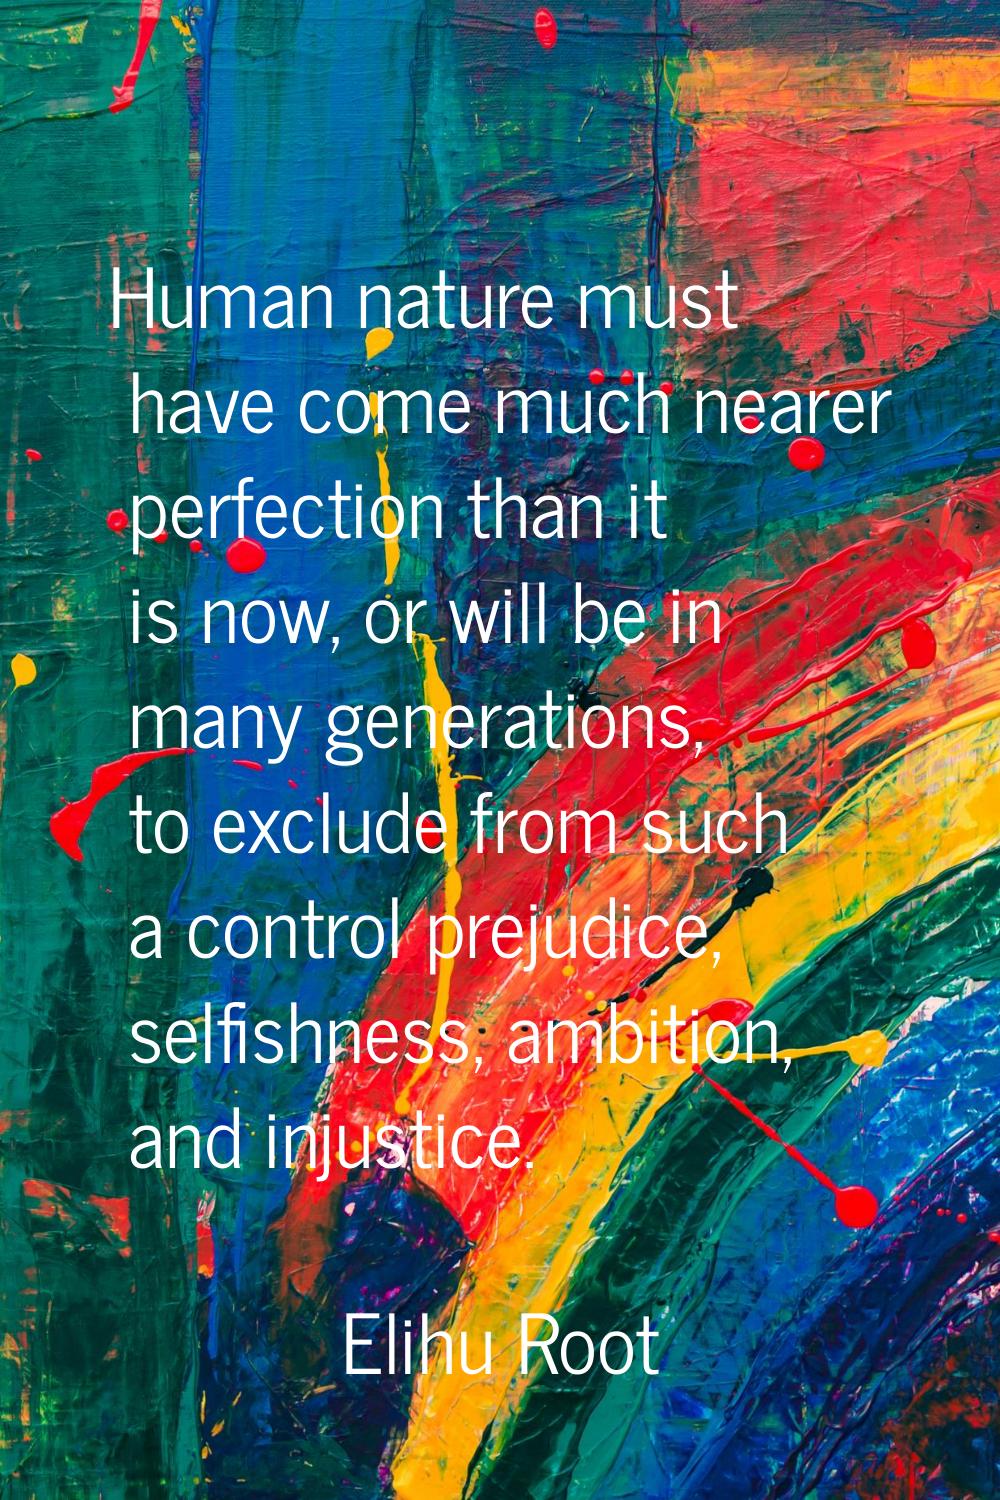 Human nature must have come much nearer perfection than it is now, or will be in many generations, 